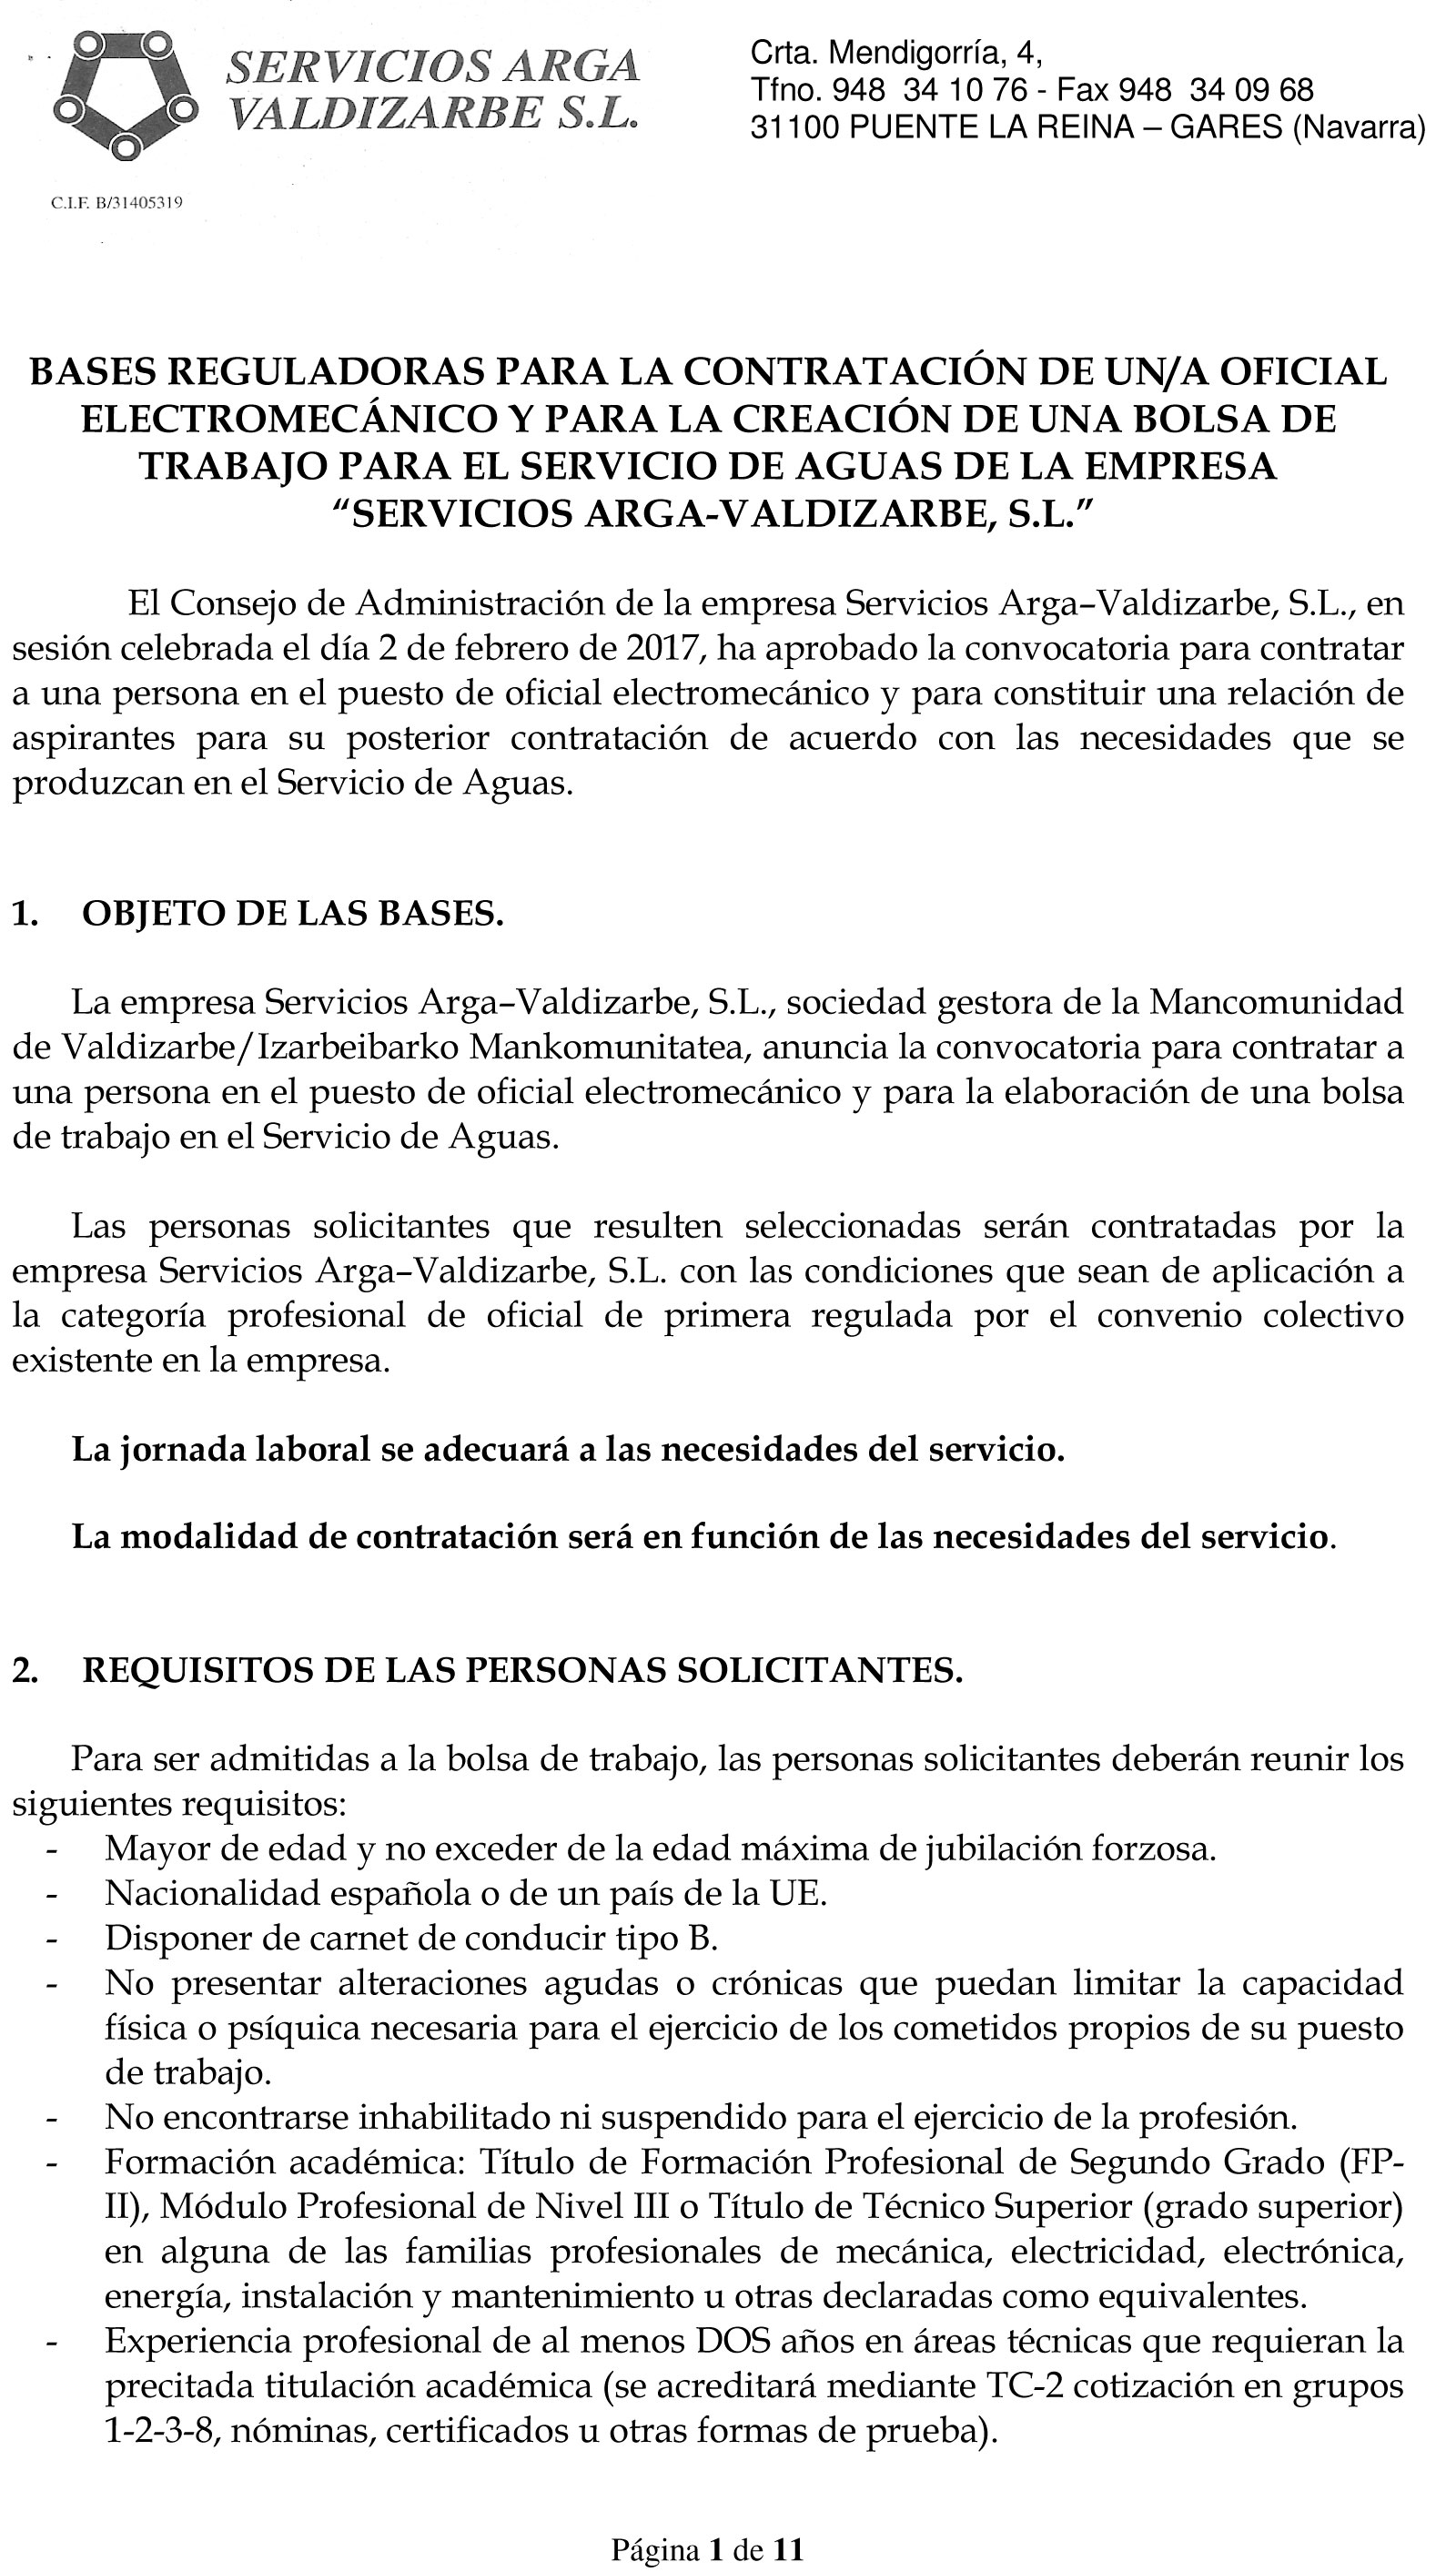 REGULATORY BASES FOR THE CONTRACTING OF AN ELECTRICAL OFFICER AND FOR THE CREATION OF A LABOR BAG FOR THE WATER SERVICE OF THE COMPANY “SERVICIOS ARGA-VALDIZARBE, S.L.”